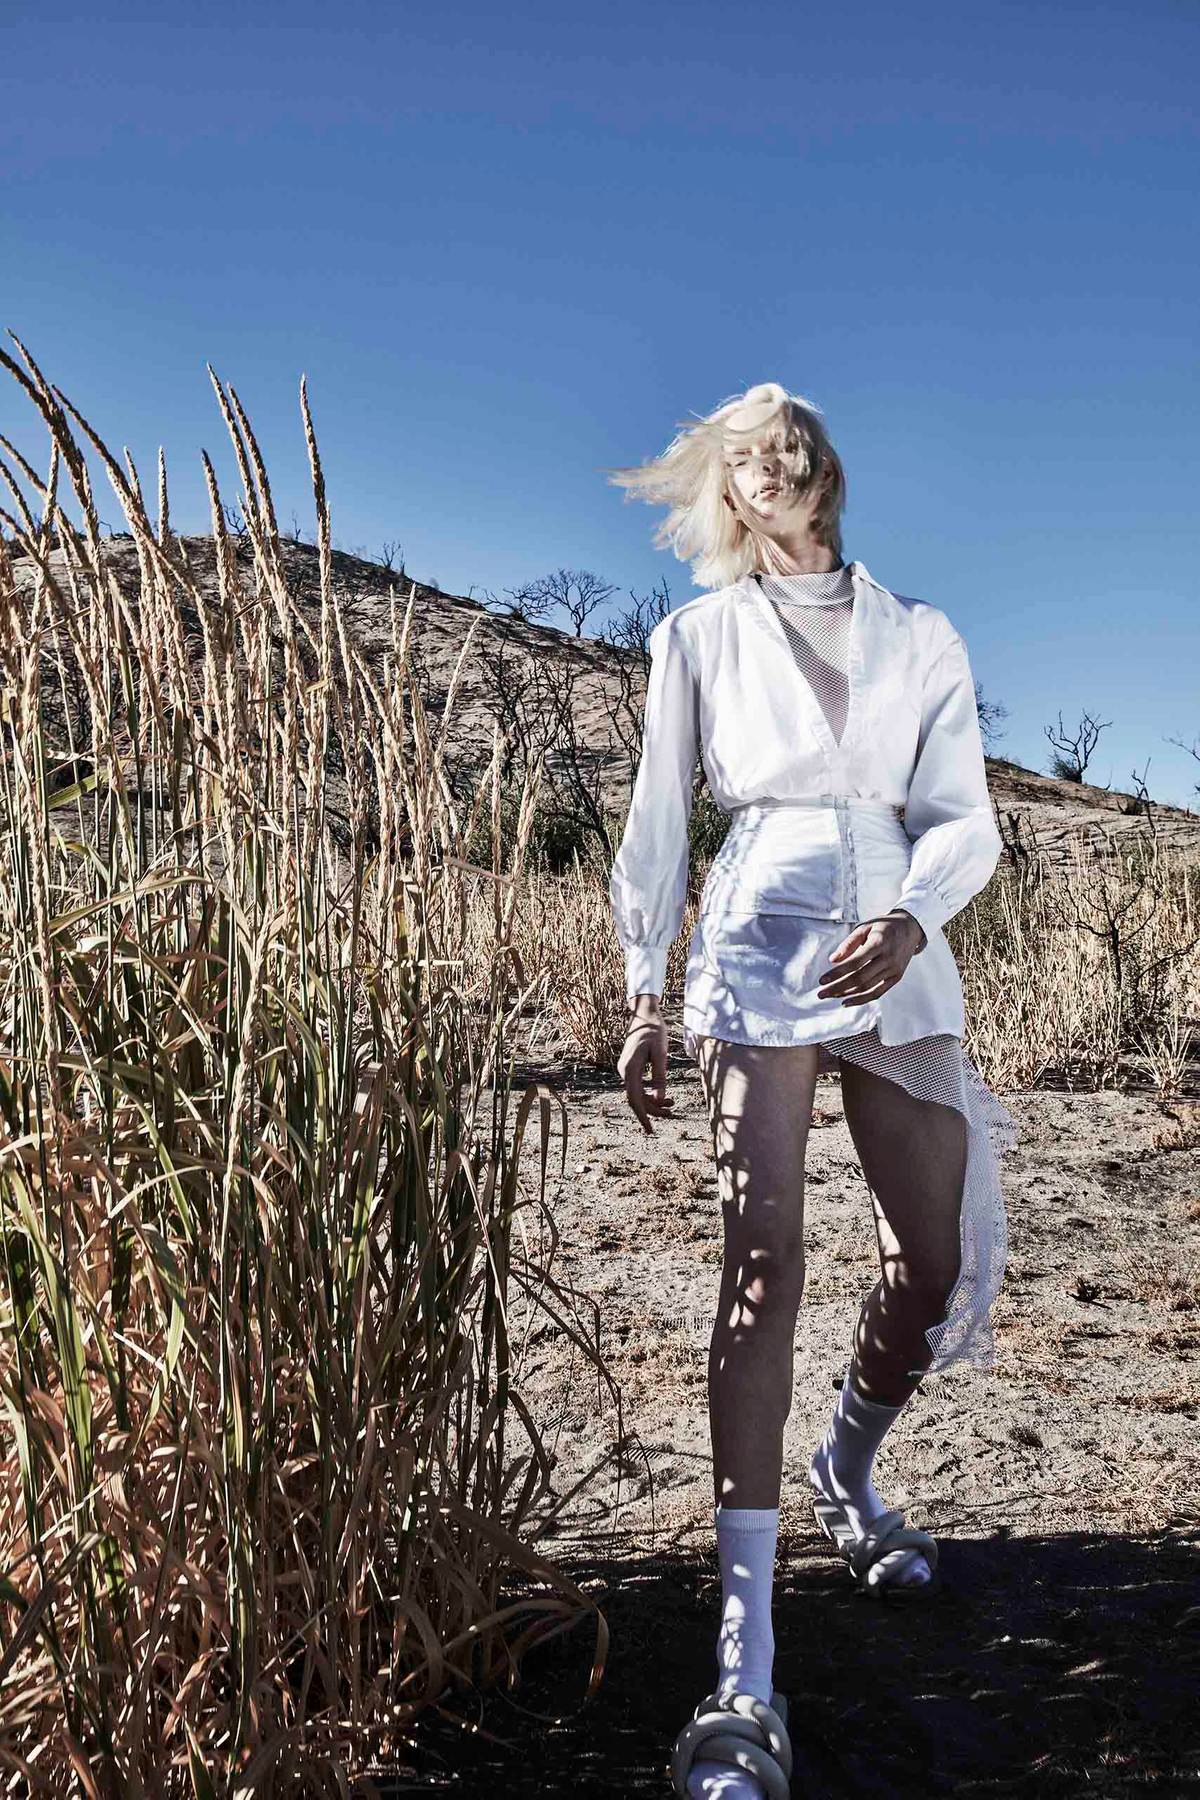 desert_fashion_sustainable_environmental_recycle_fashion_photography_landscape_desert_california__DT_5200_Enough_Alyona_DT_5200_Alyona_EnoughRAW_U9A0002 copy.jpg